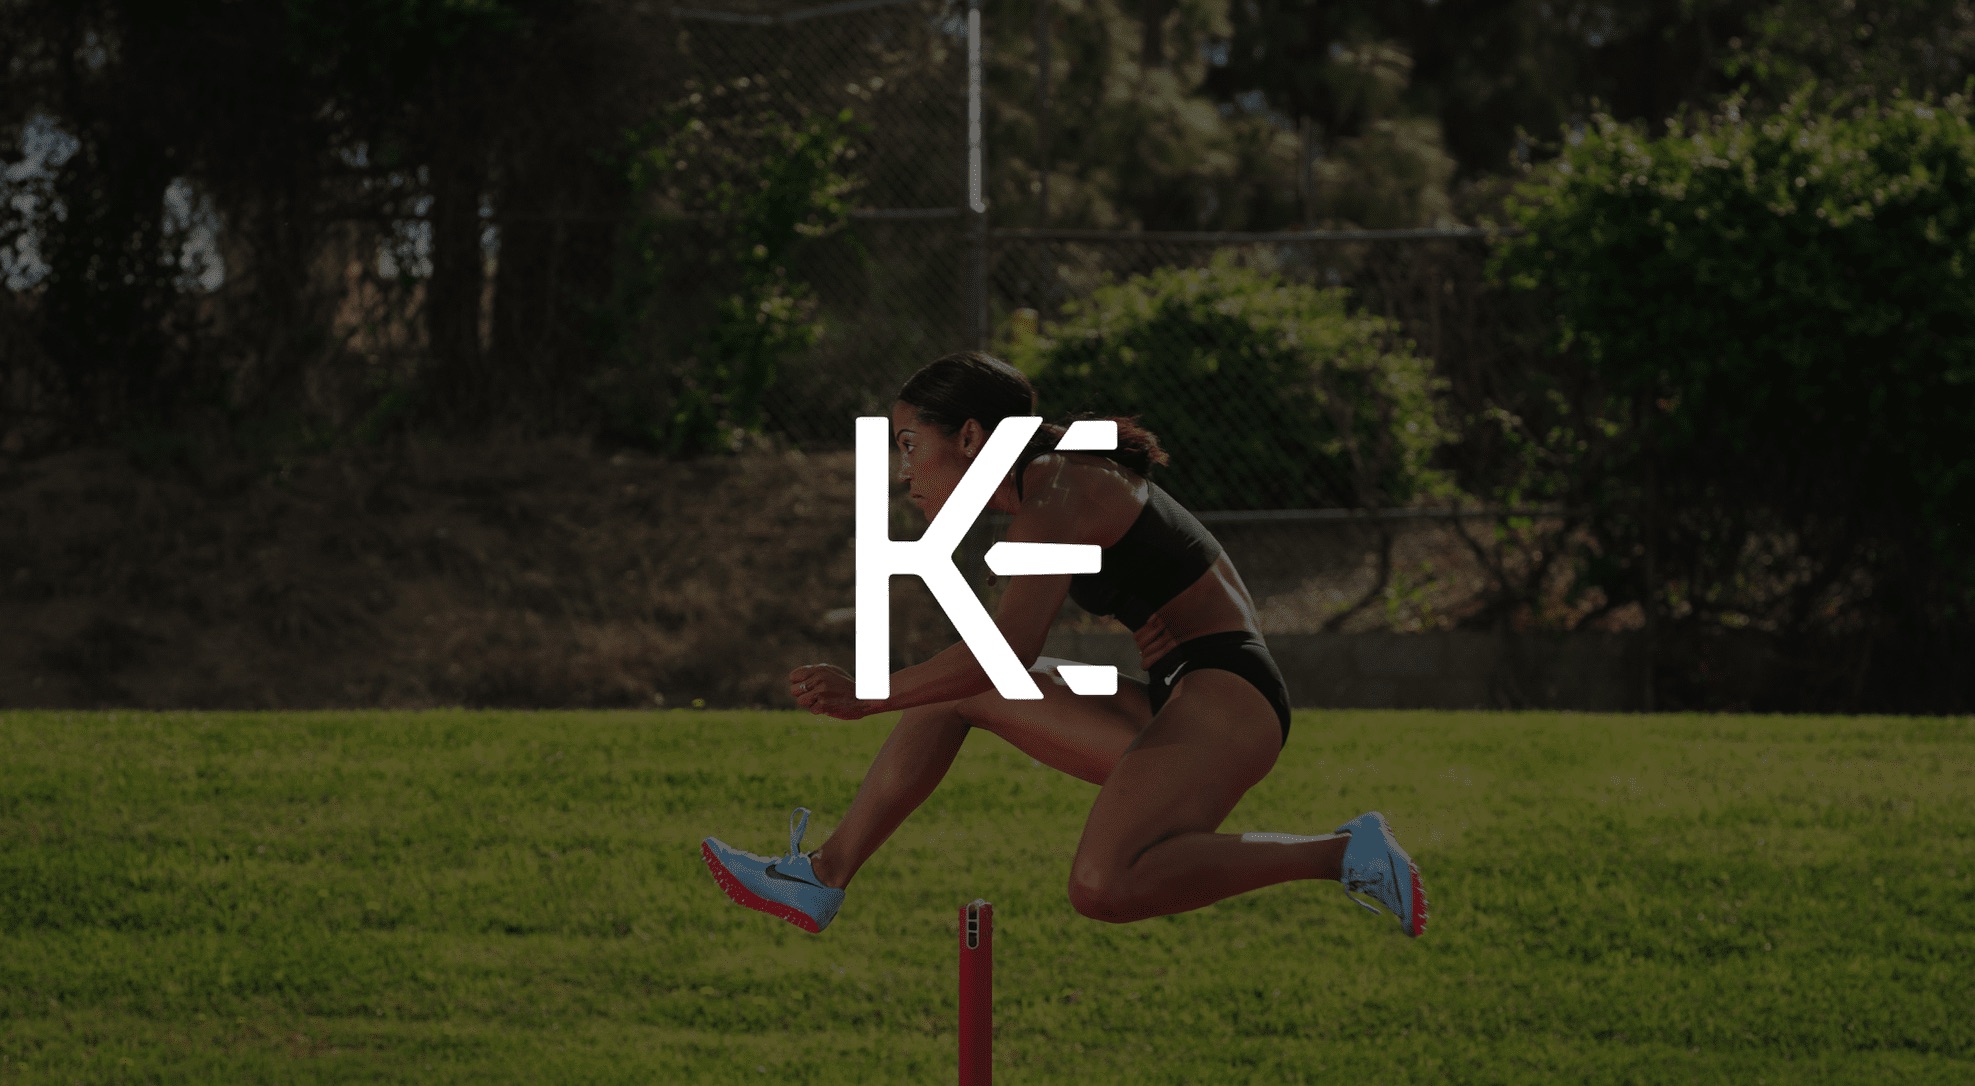 Professional Photography Services by C&I Studios White KE logo against a dimmed background side view of a female track athlete jumping a hurdle